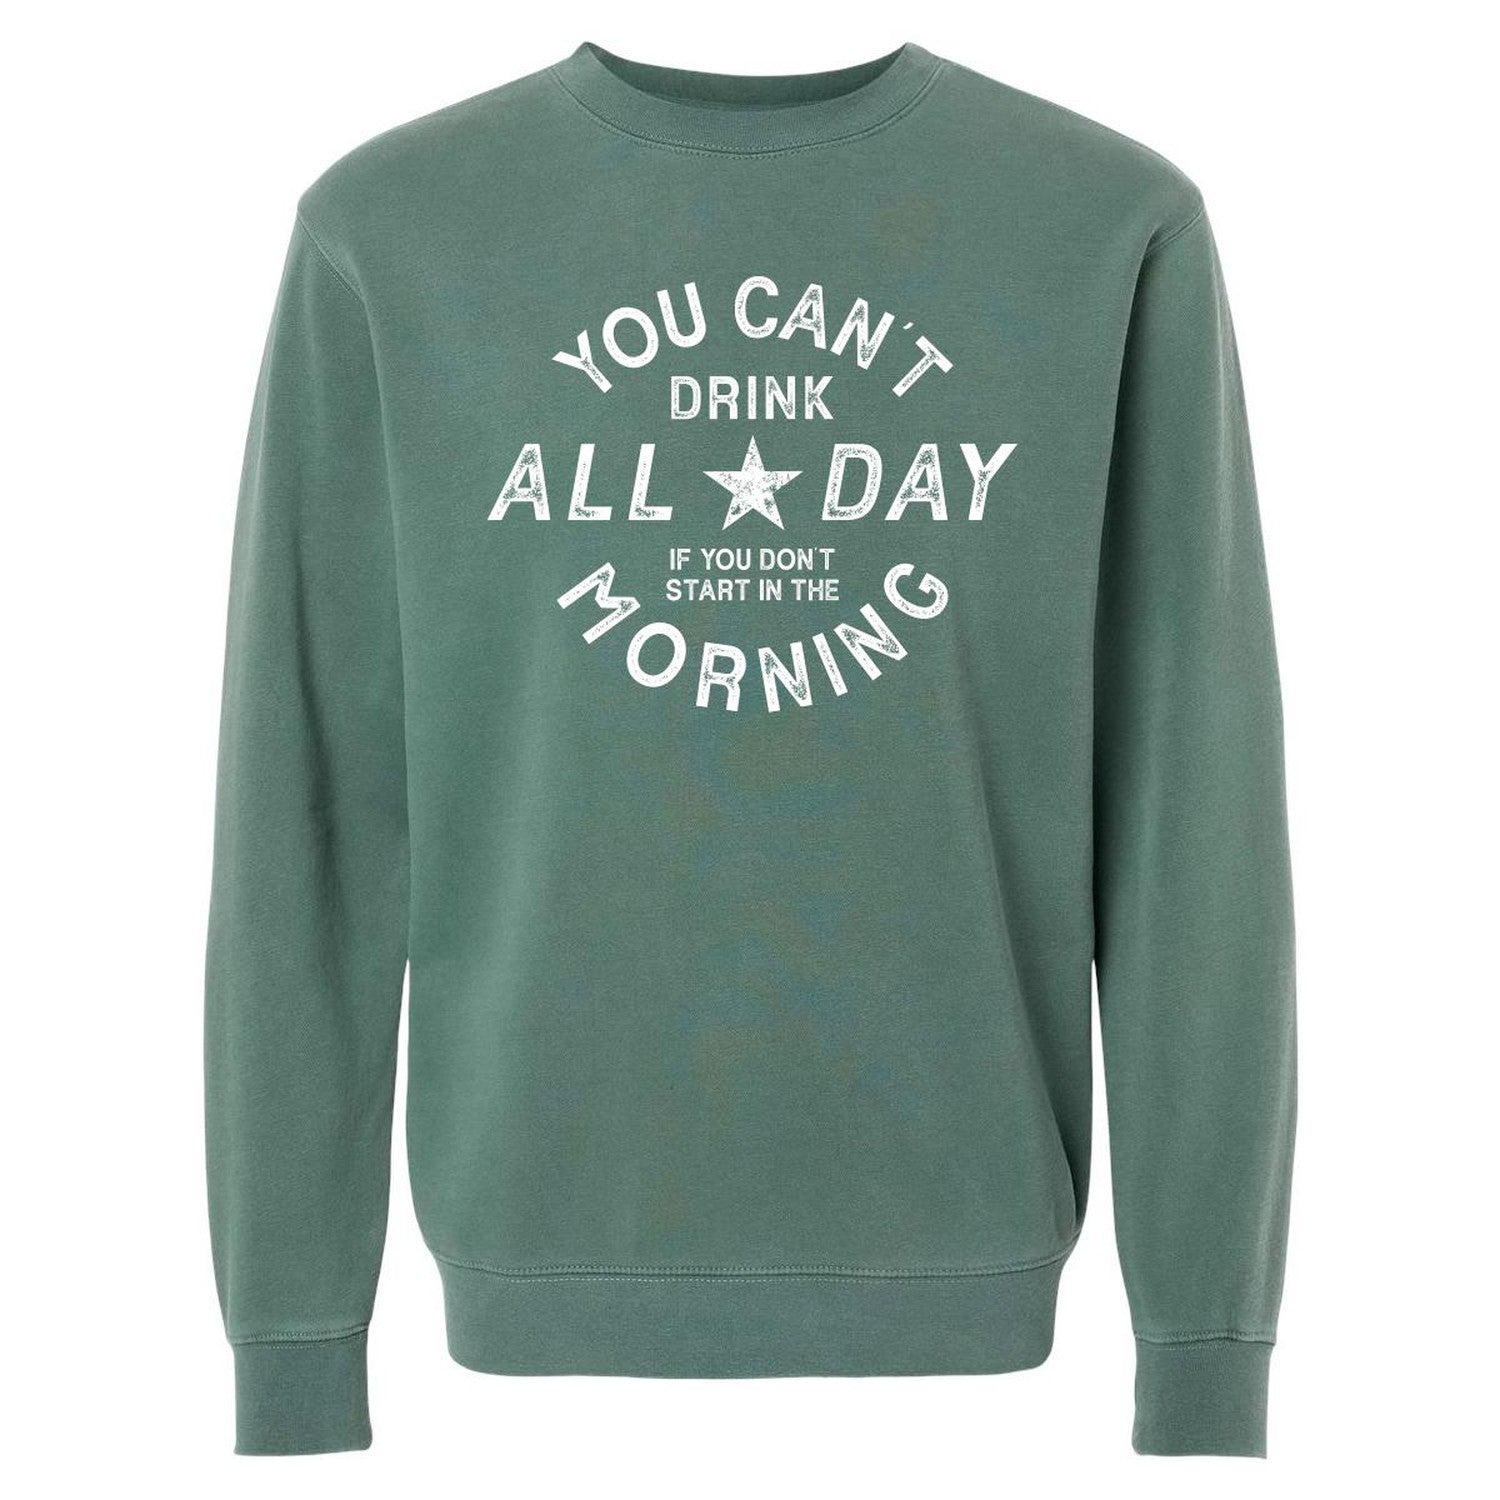 Can't Drink All Day Crewneck